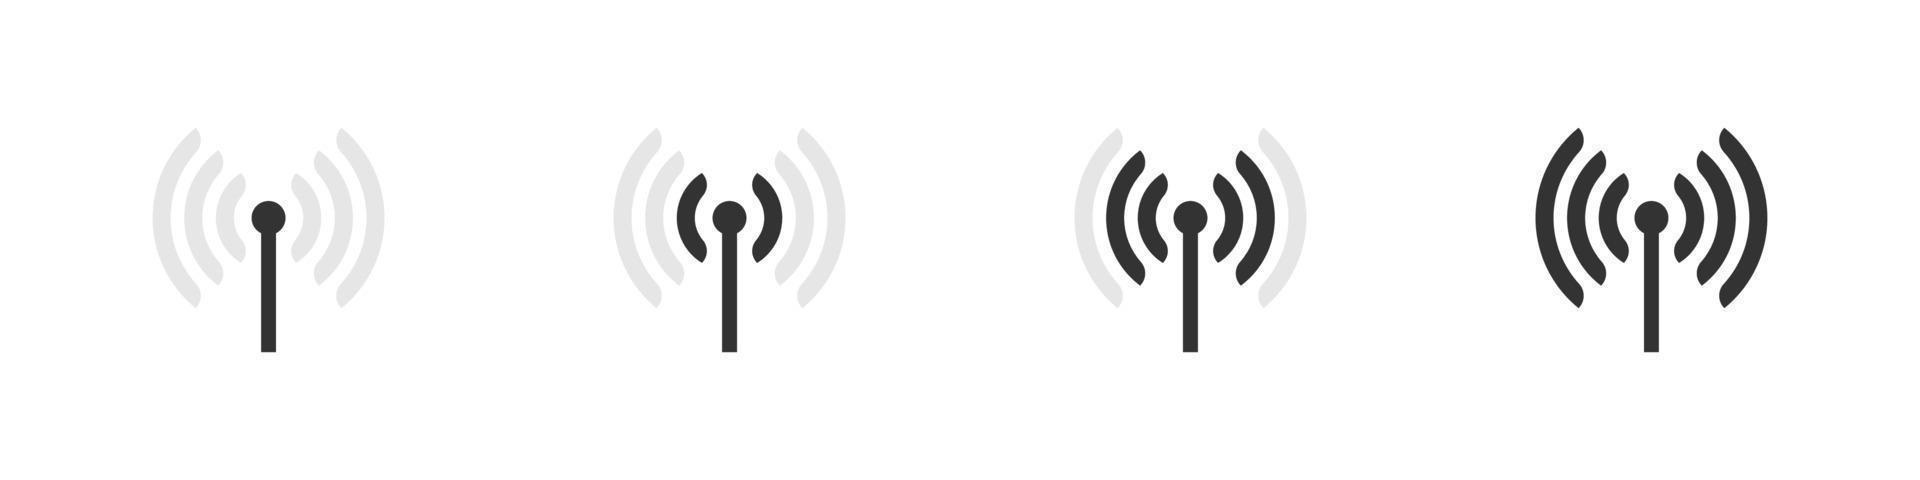 Antena WiFi. Wifi icons concept. Wireless internet sign isolated on white background. Vector illustration